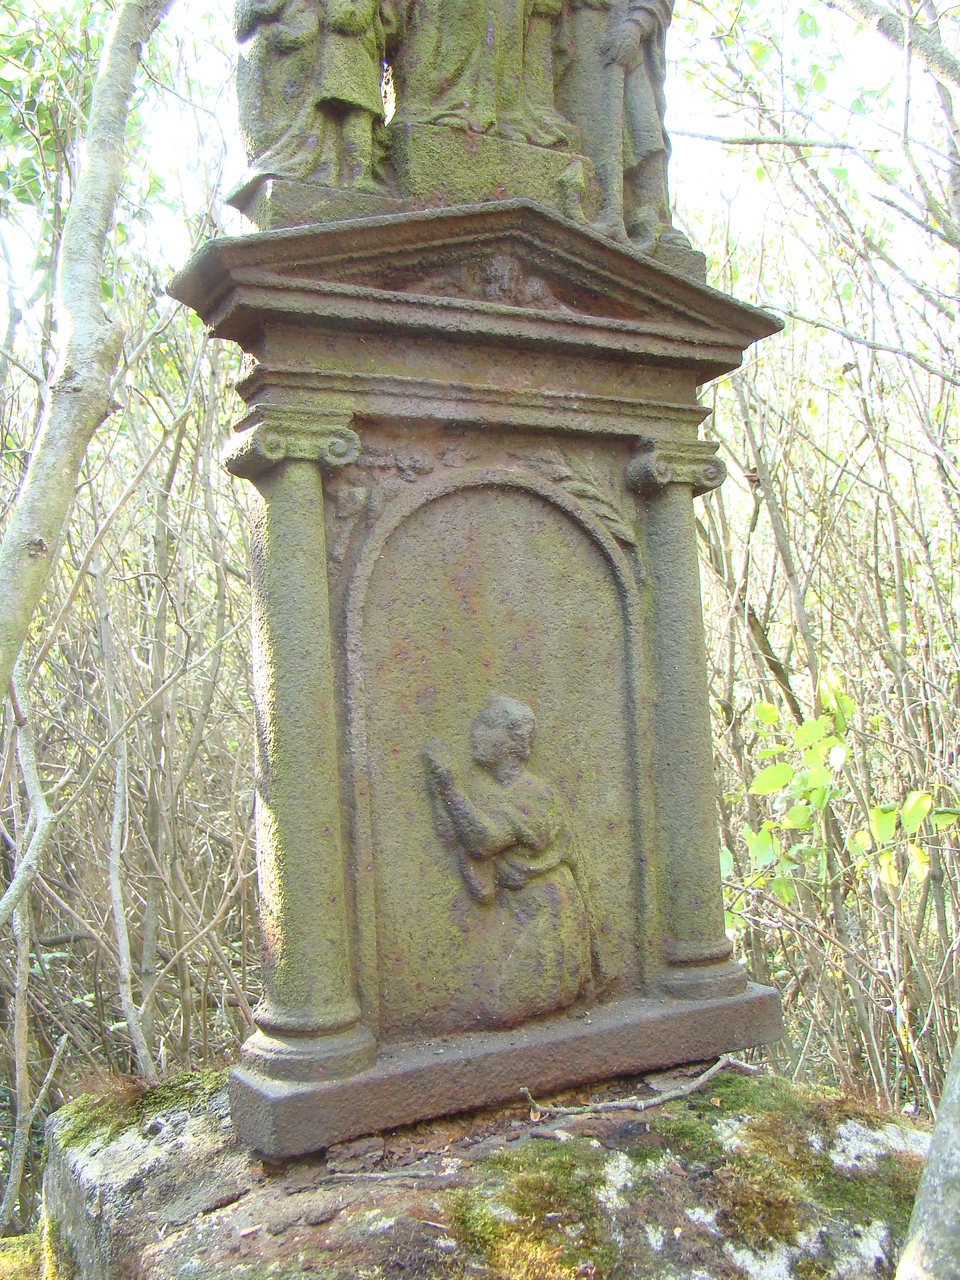 Tomb of N.N., Czerwonogród cemetery, state from 2005